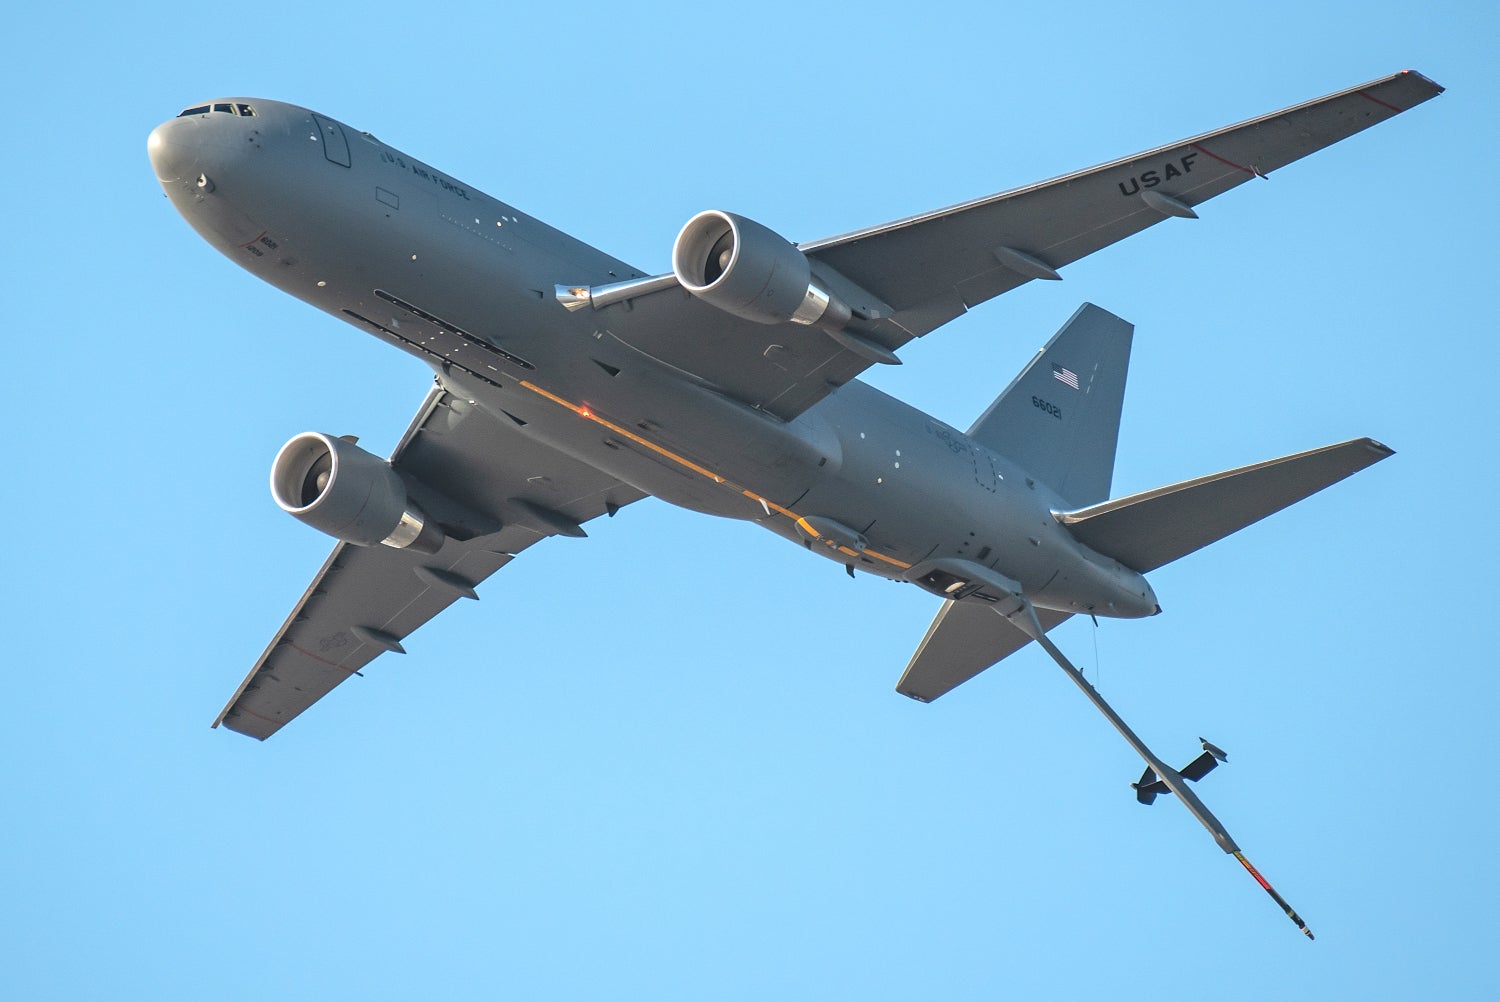 A U.S. Air Force KC-46 Pegasus from the 305th Air Mobility Wing at Joint Base McGuire-Dix-Lakehurst, N.J., performs an aerial demonstration over the Ohio River in downtown Louisville, Ky., April 23, 2022 as part of the Thunder Over Louisville air show. This year’s event celebrated the 75th anniversary of the United States Air Force. (U.S. Air National Guard photo by Dale Greer)